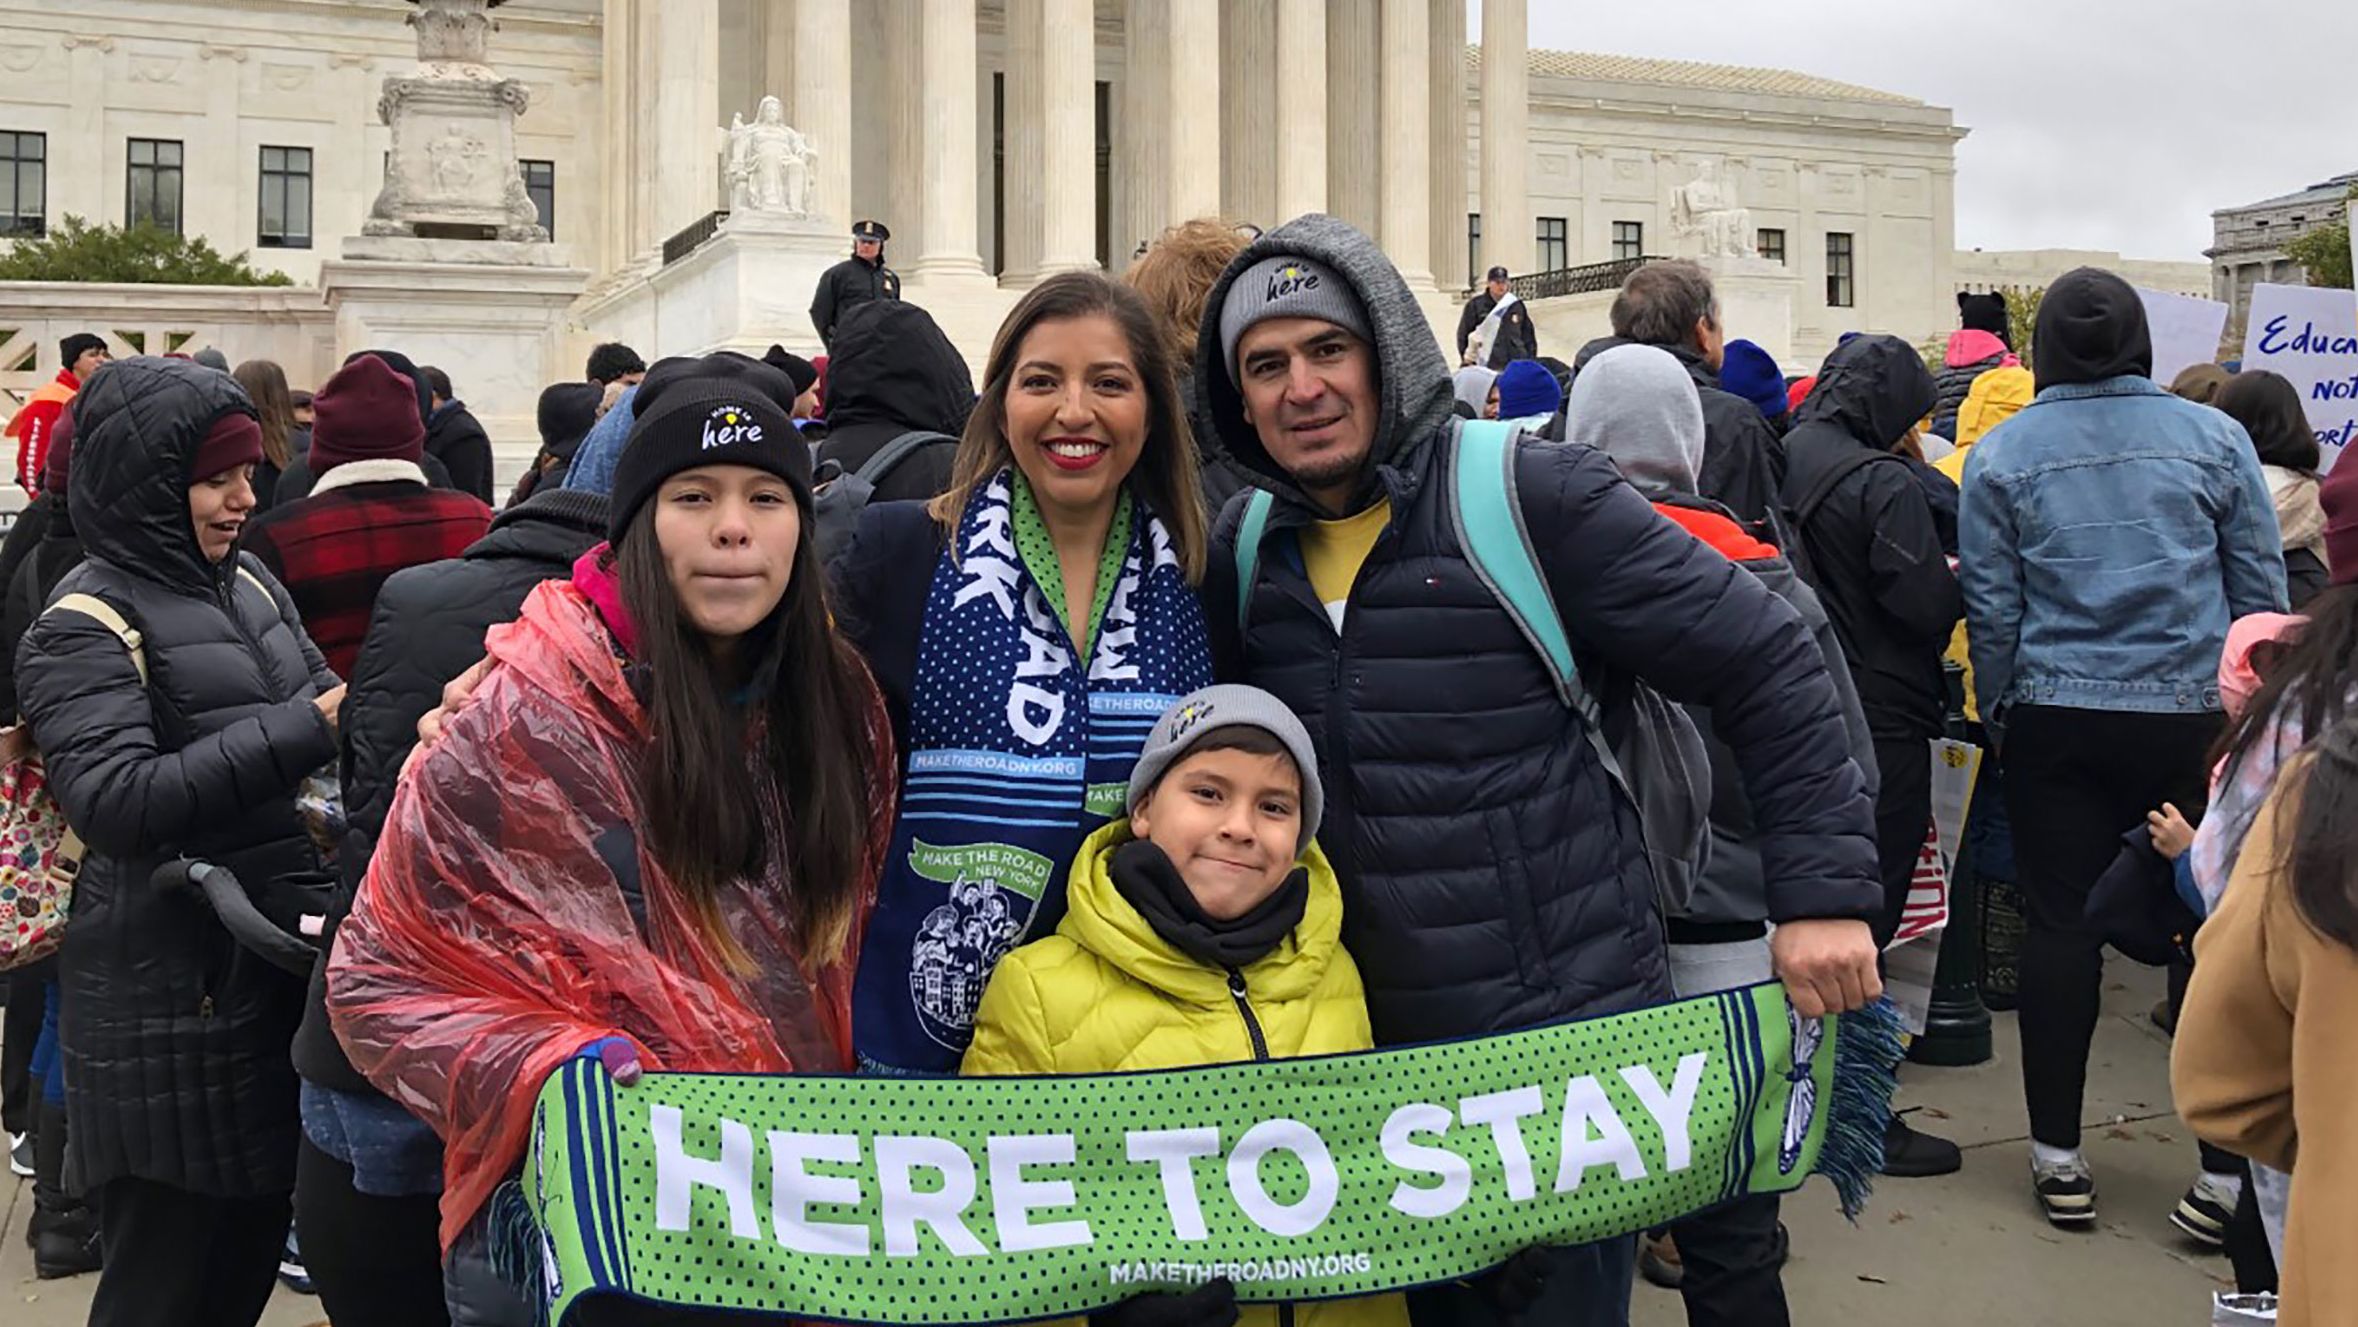 Eliana Fernandez and her family take part in a DACA protest in front of the Supreme Court. The justices could soon issue a ruling on the Trump administration's plan to end the program.